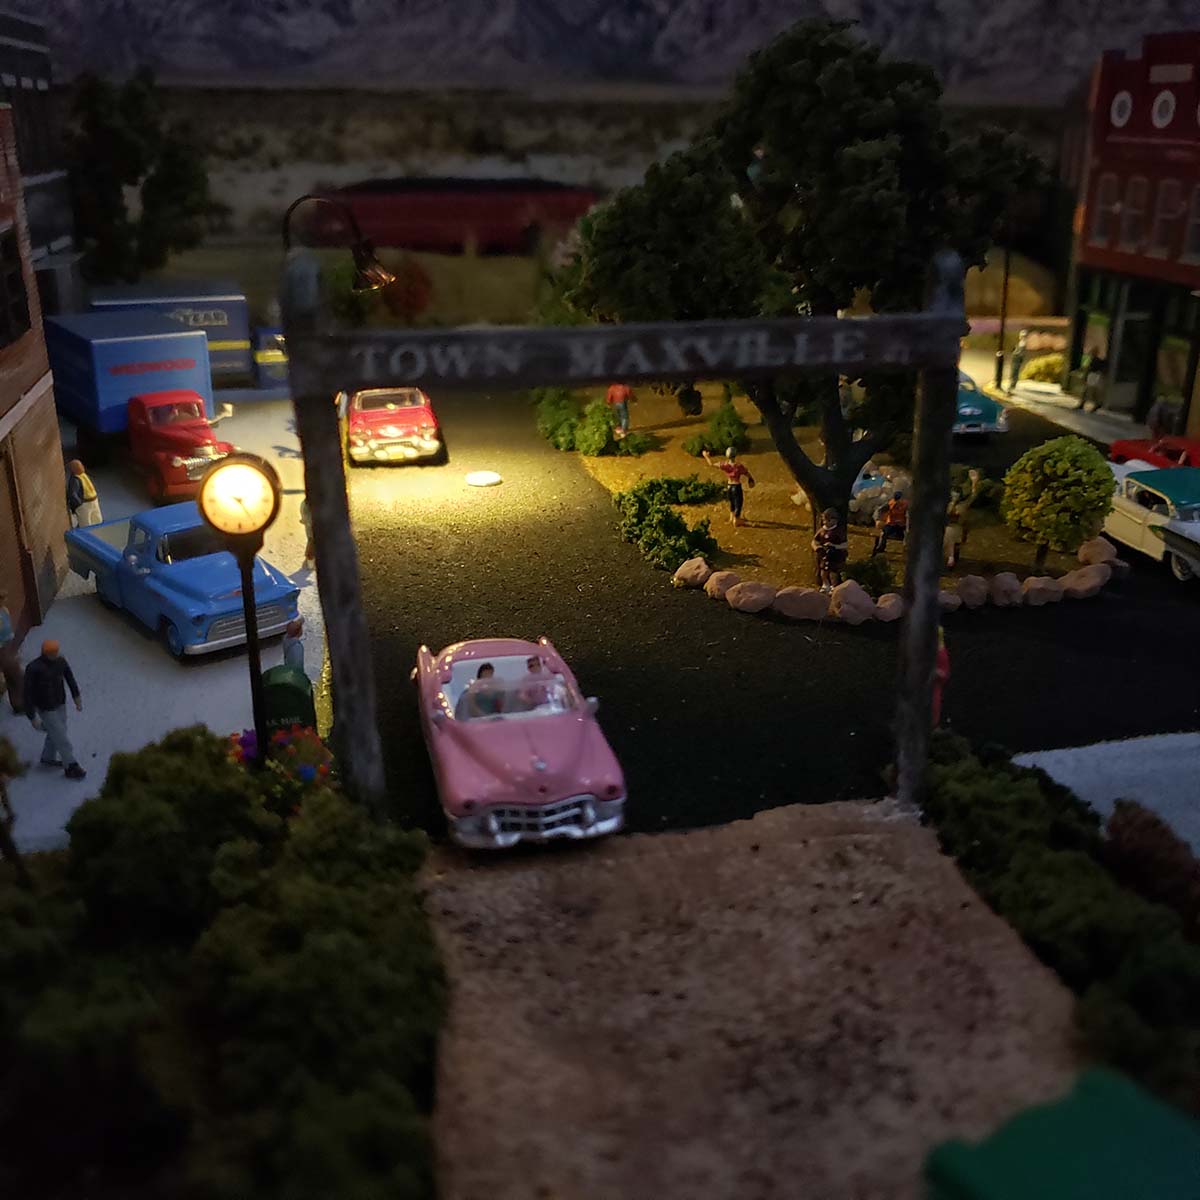 ho scale small town